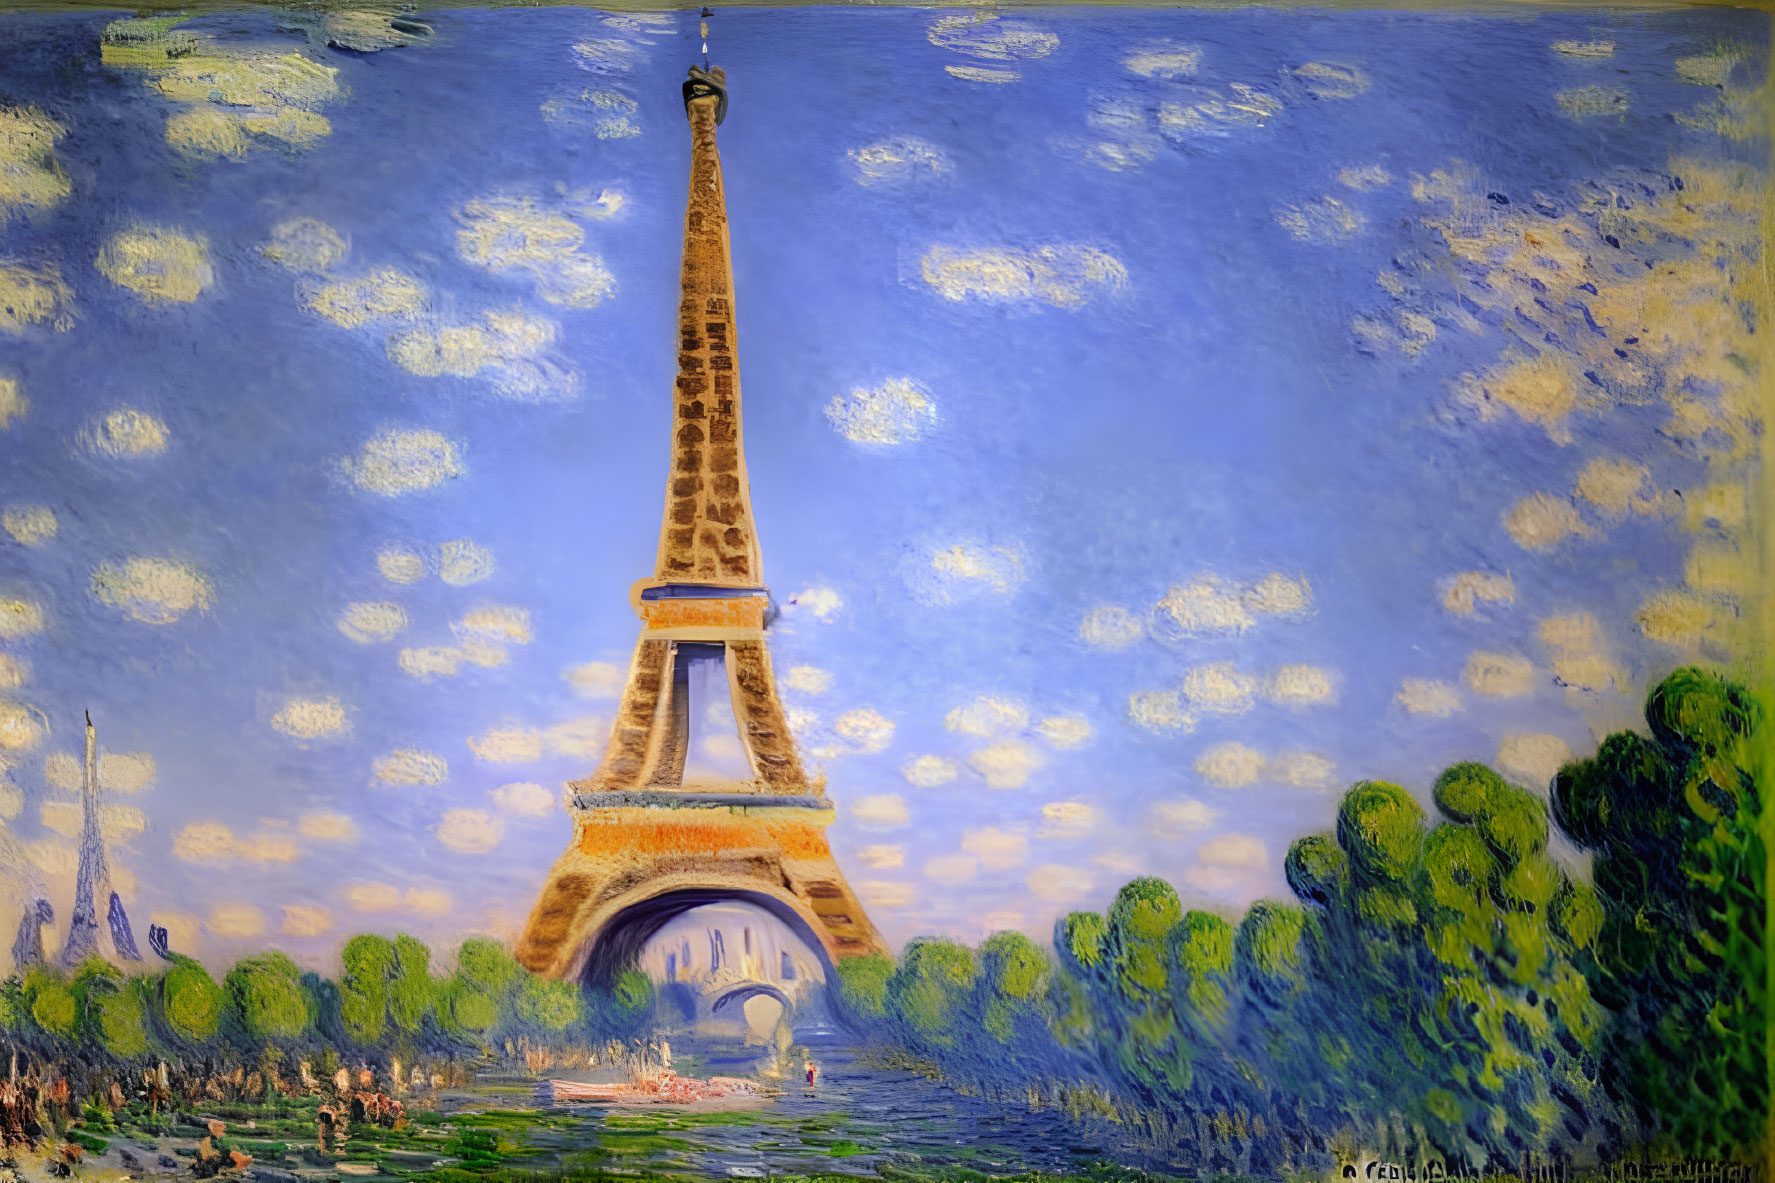 Eiffel Tower painting in Impressionist style with blue sky and greenery